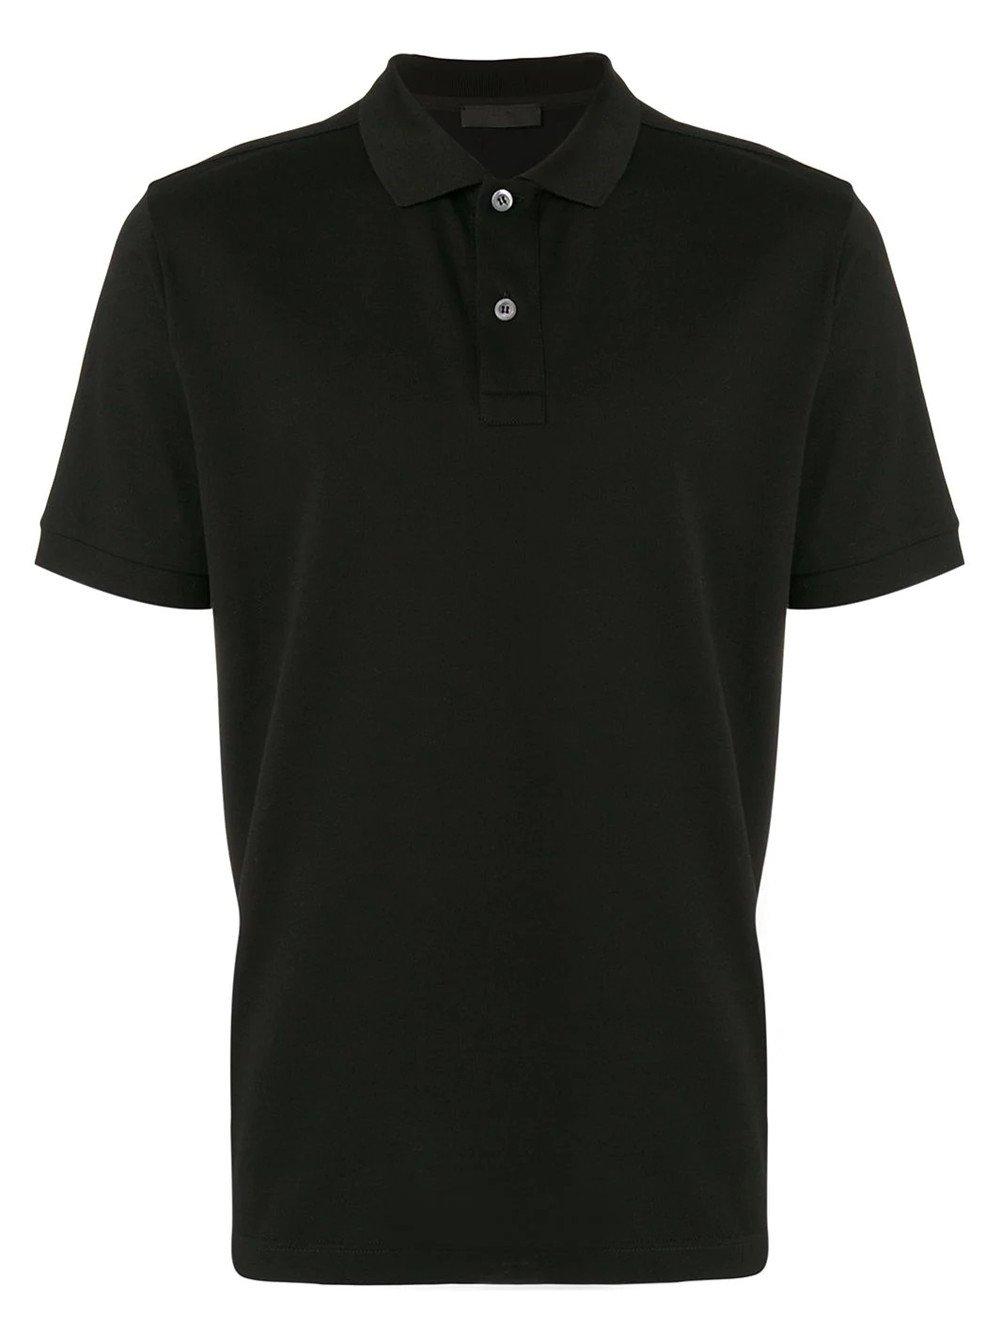 Prada Cotton Classic Polo Shirt in Black for Men - Save 54% - Lyst